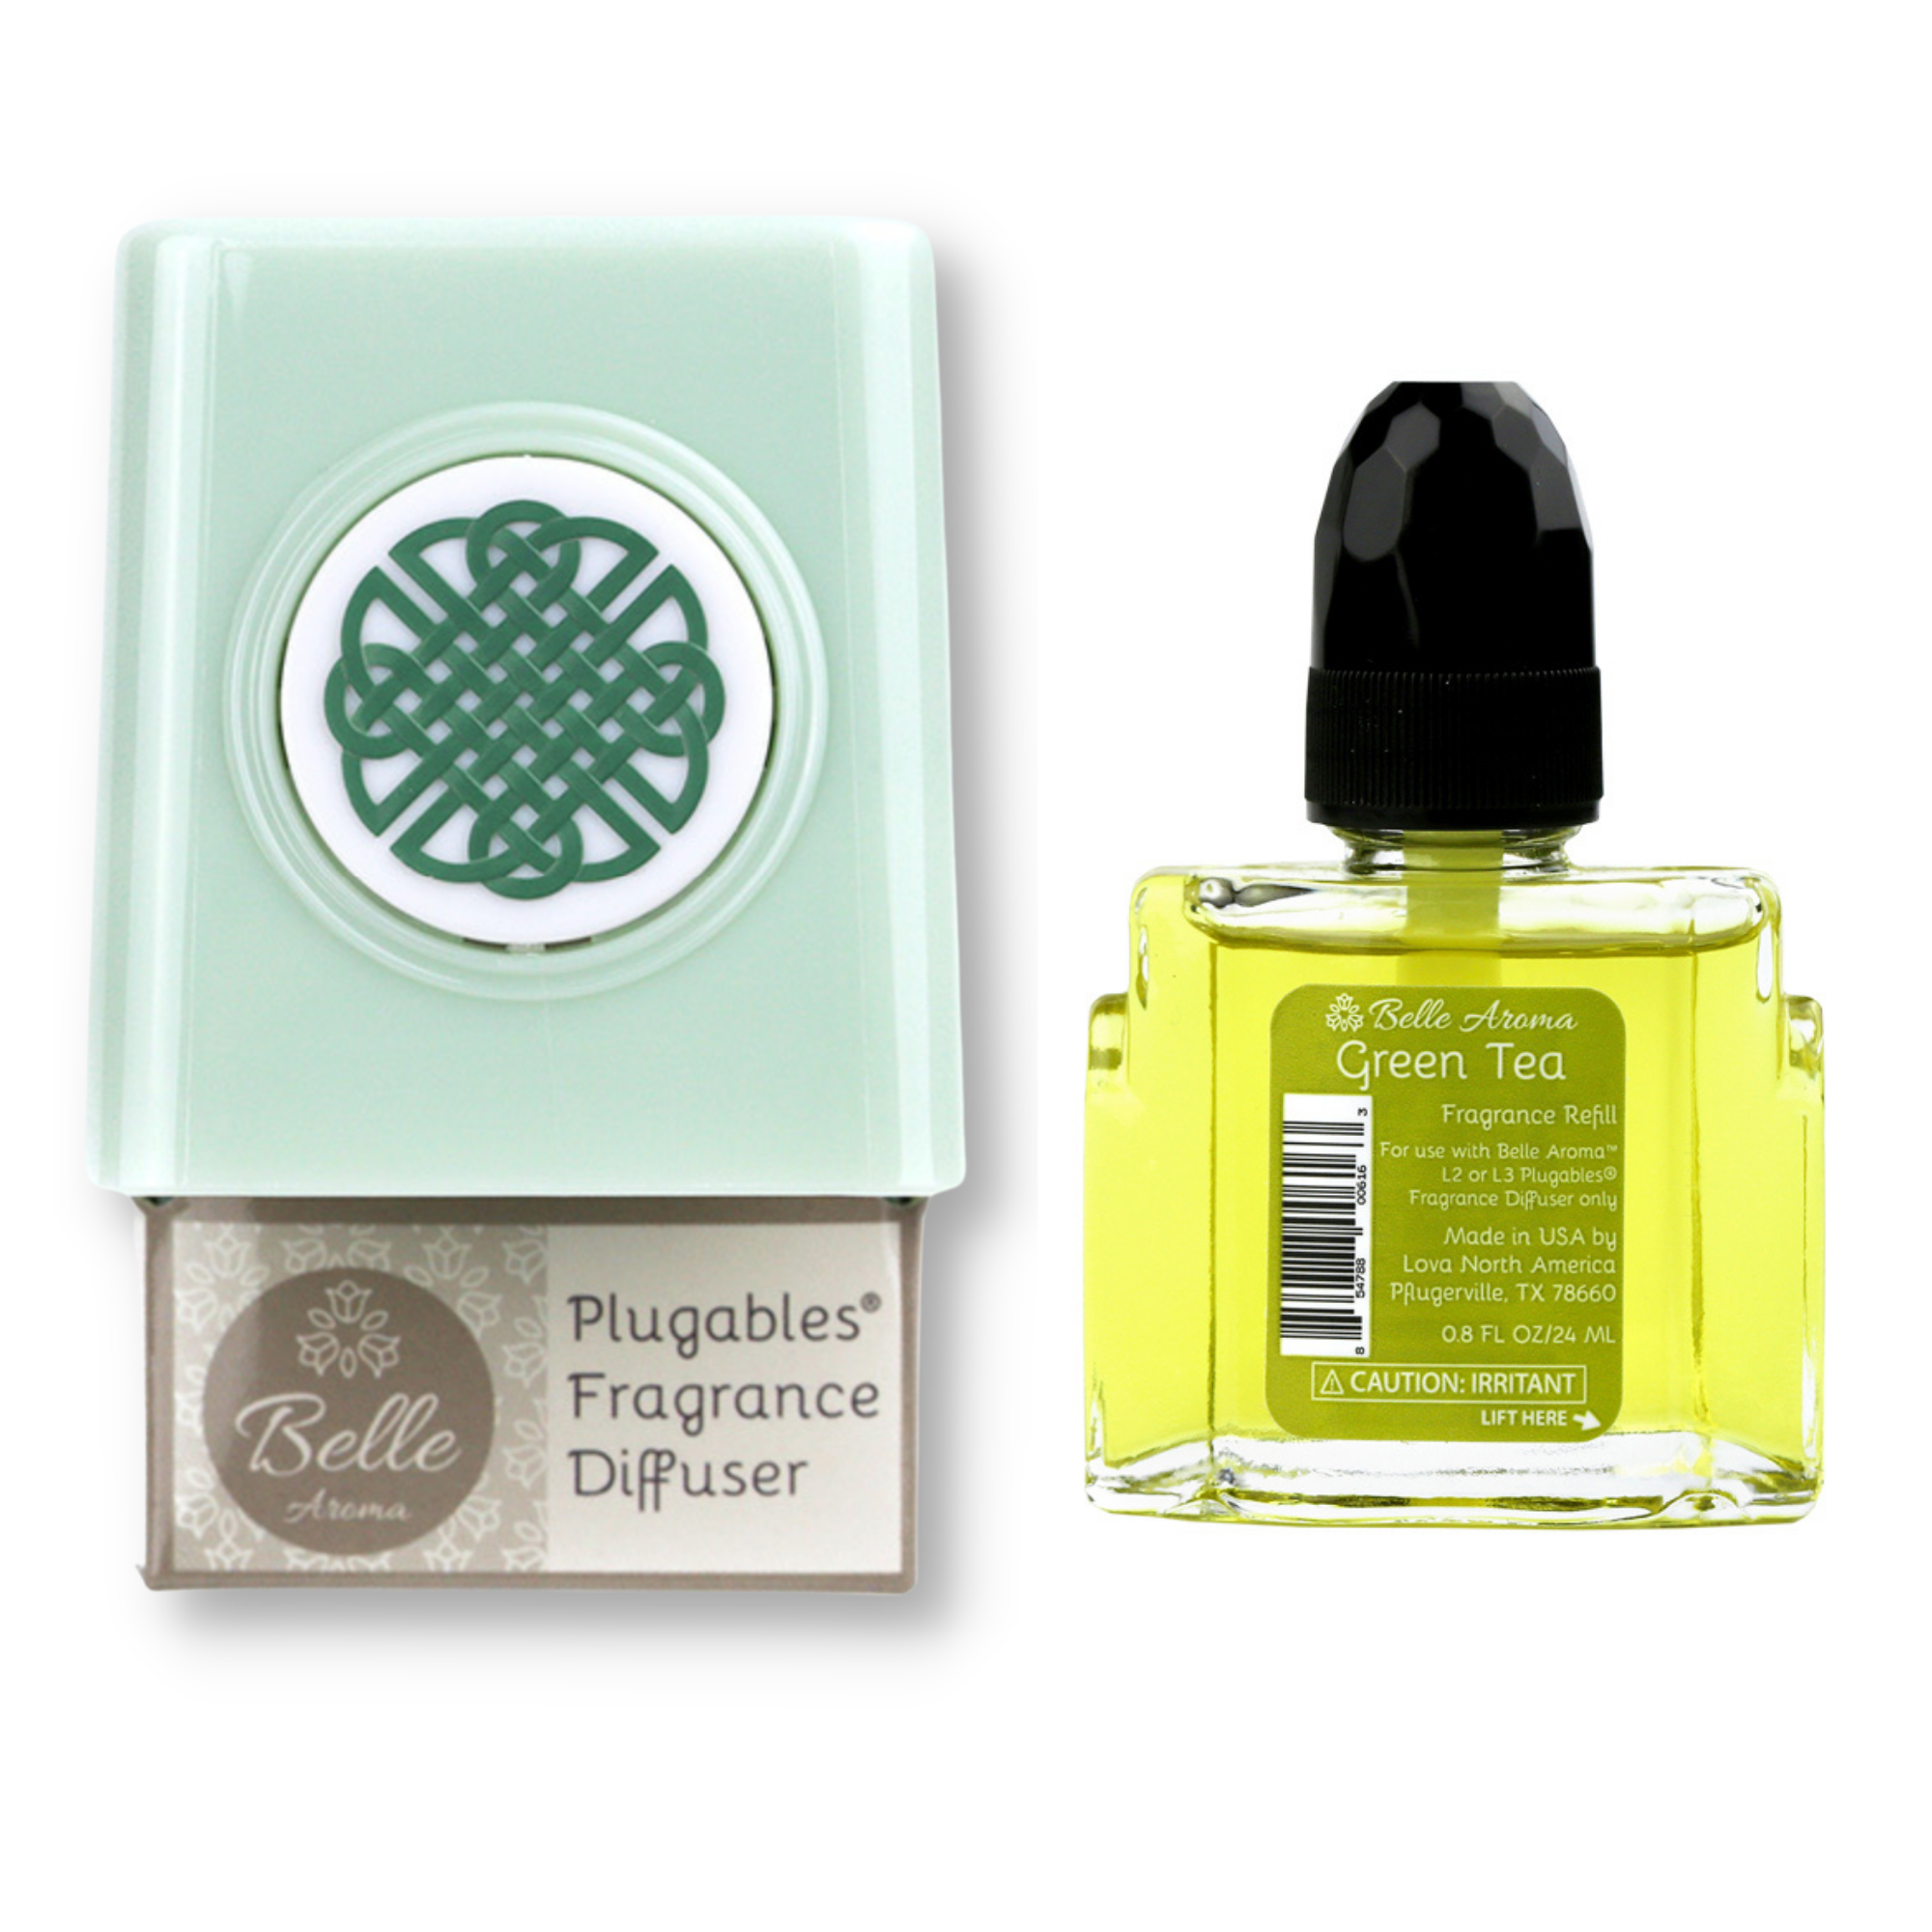 Celtic Knot Medallion Plugables® Plugin Electric Scented Oil Diffuser - Sea Glass with Green Tea Fragrance Oil Home Fragrance Accessories